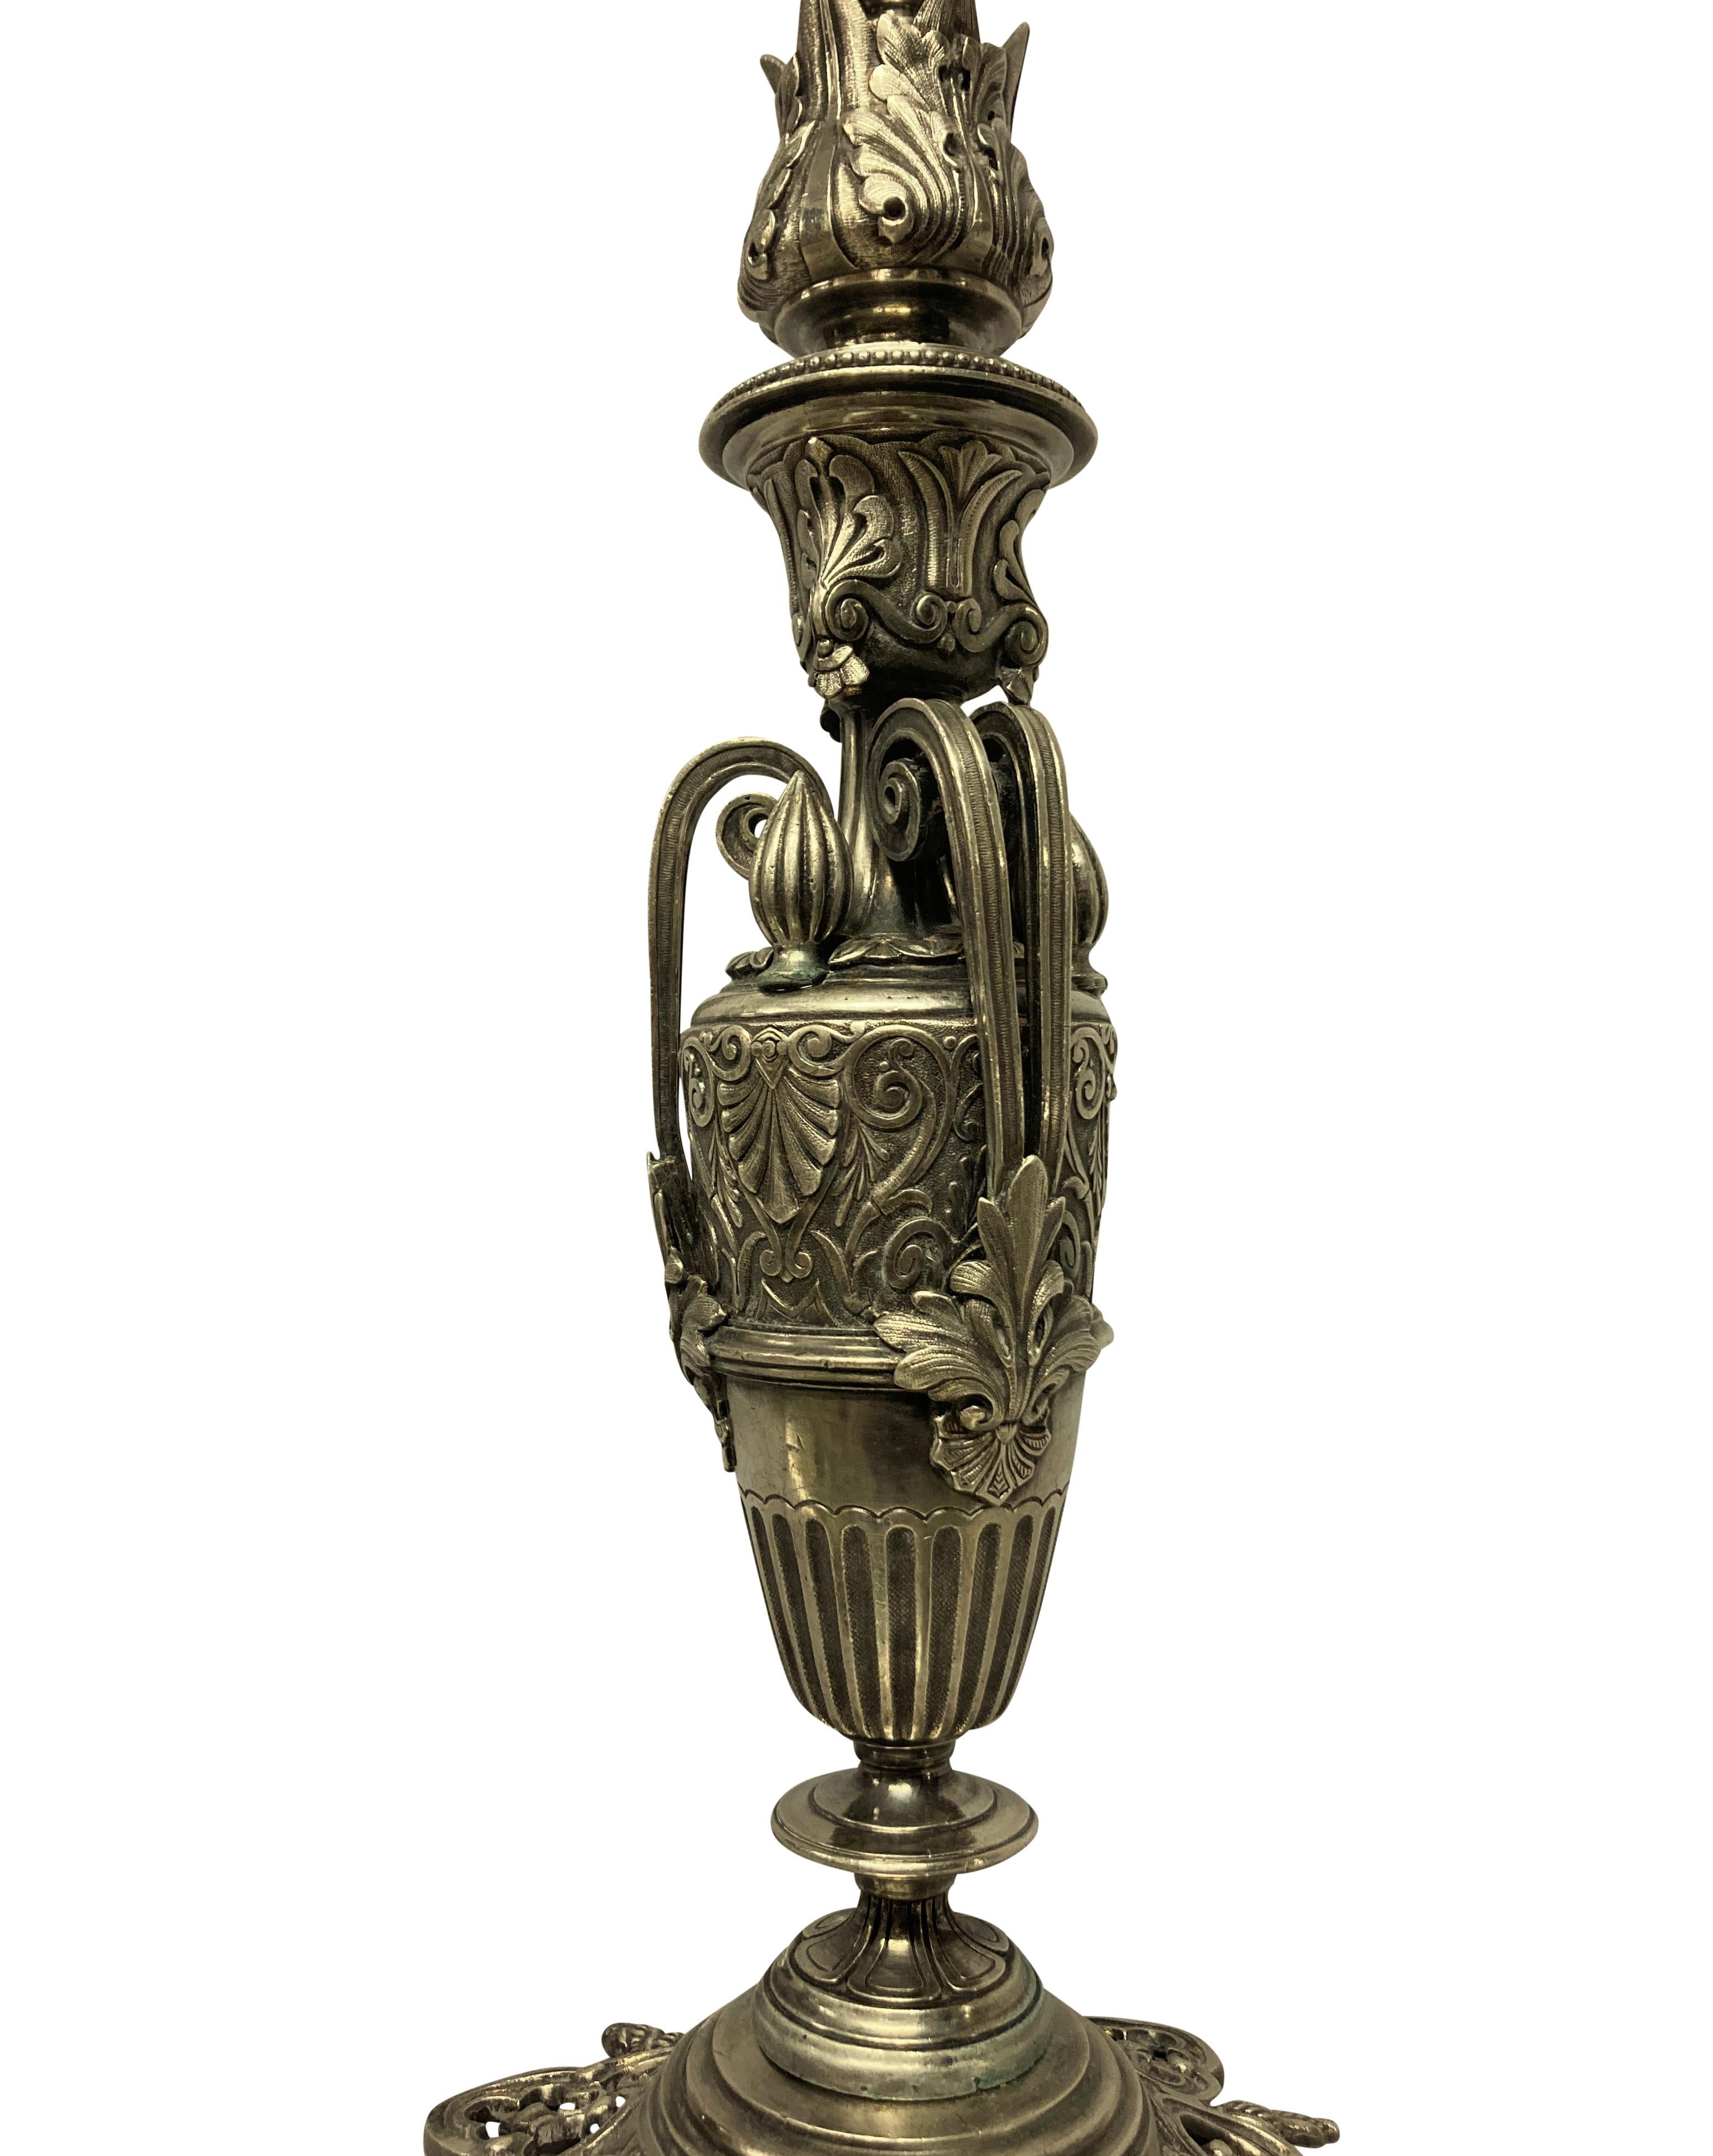 A French silver plated Art-Nouveau table lamp with neo-classical elements.